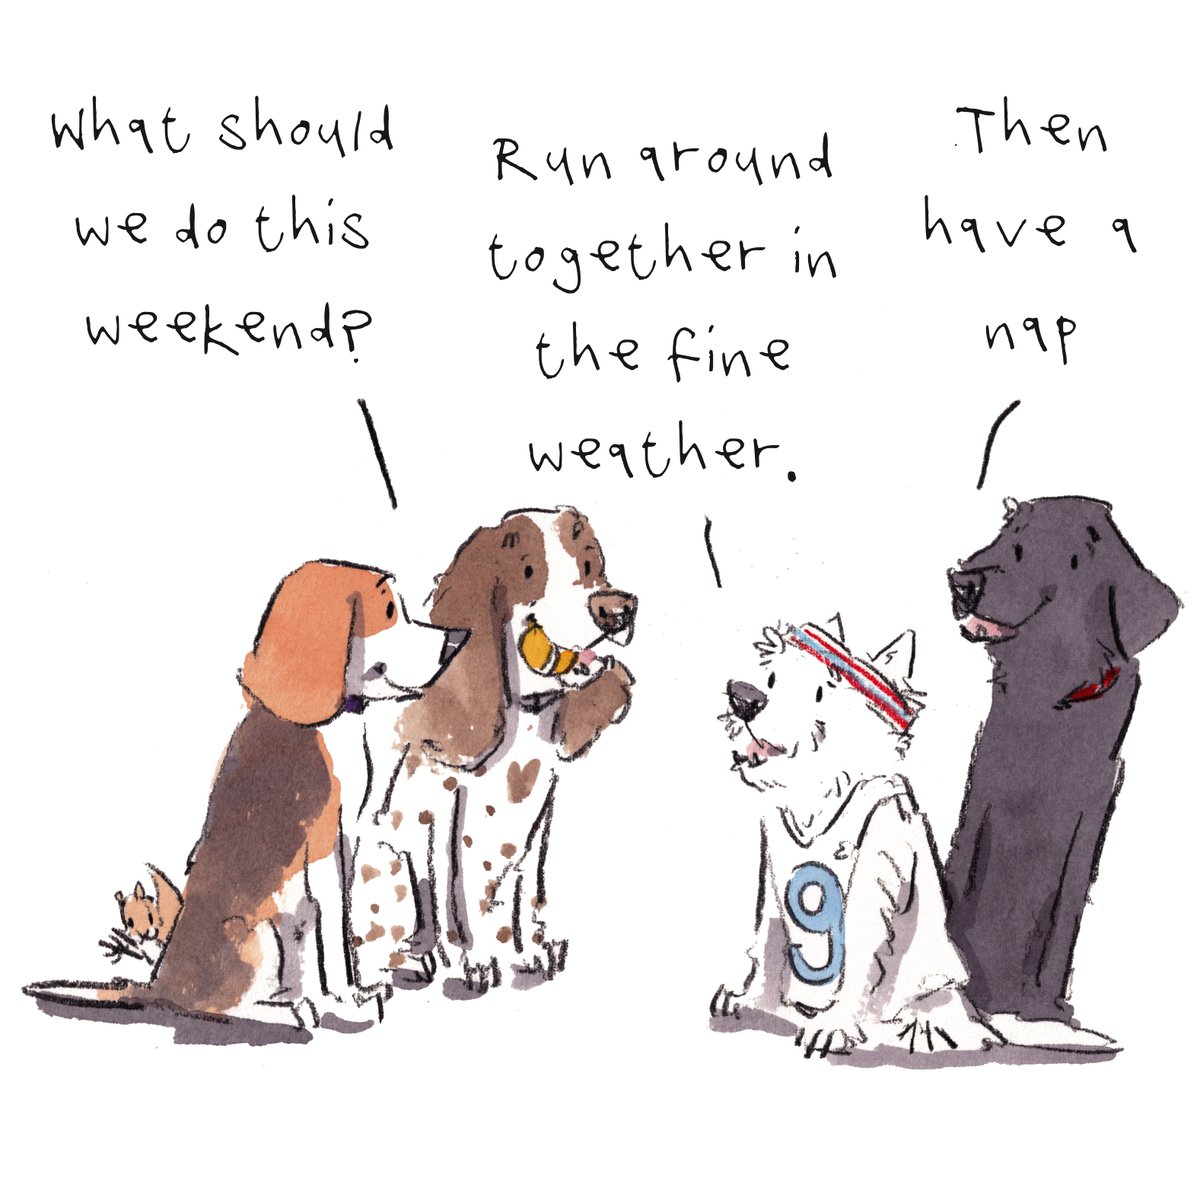 Good night, lovely people and lovely dogs.
The team have got a great plan for their weekend.
Sleep well and sweet dreams.
I hope that your weekend is wonderful. 
#hoorayfordogs #beagle #springer #westie #labrador #redsquirrel